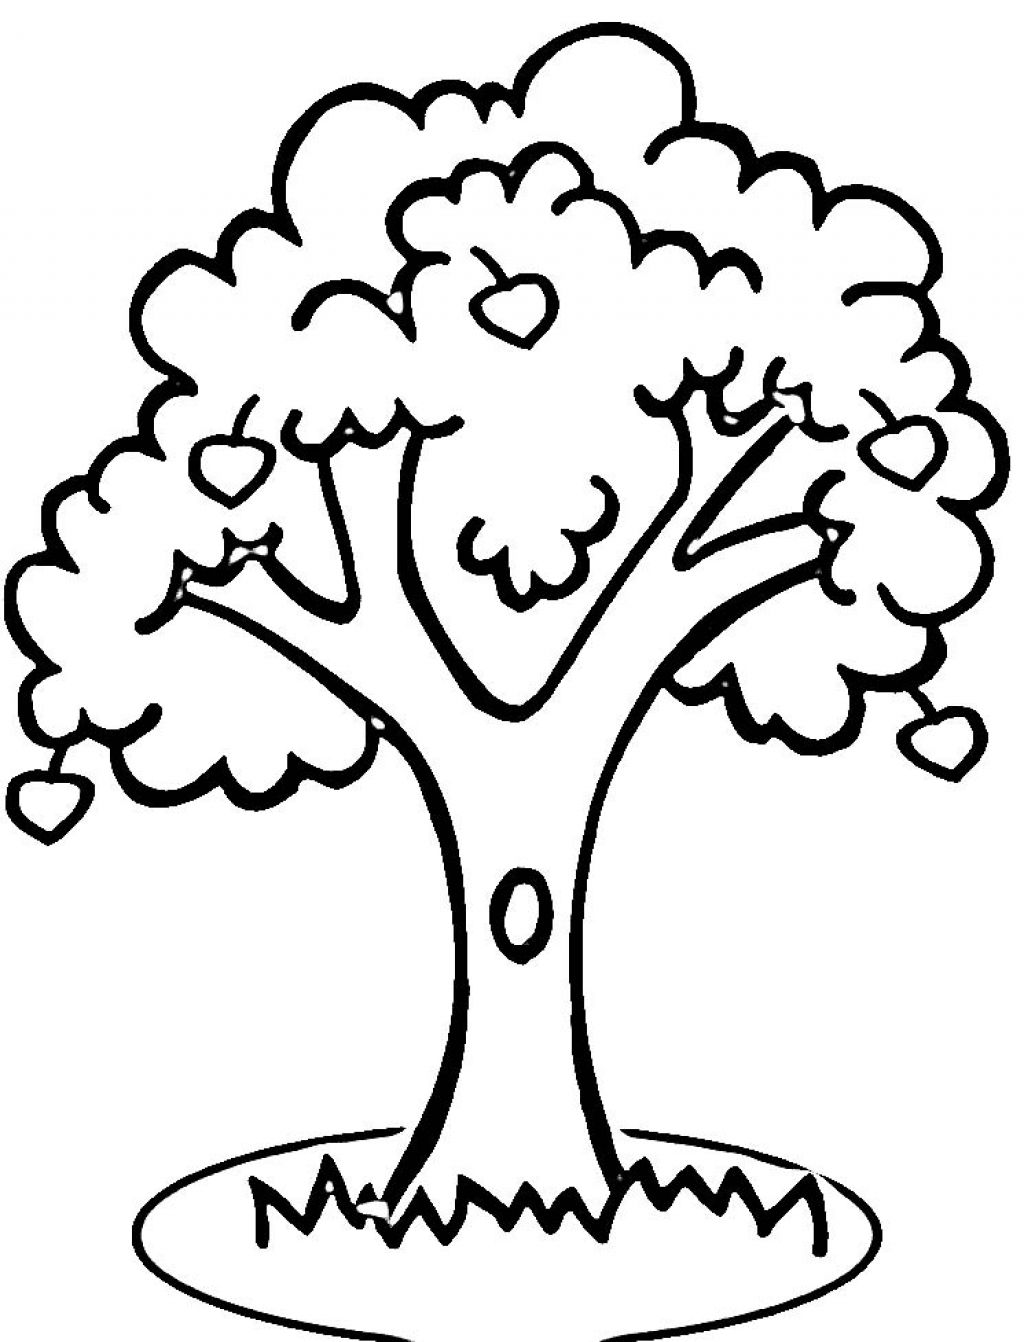 Apple Trees Drawing - ClipArt Best